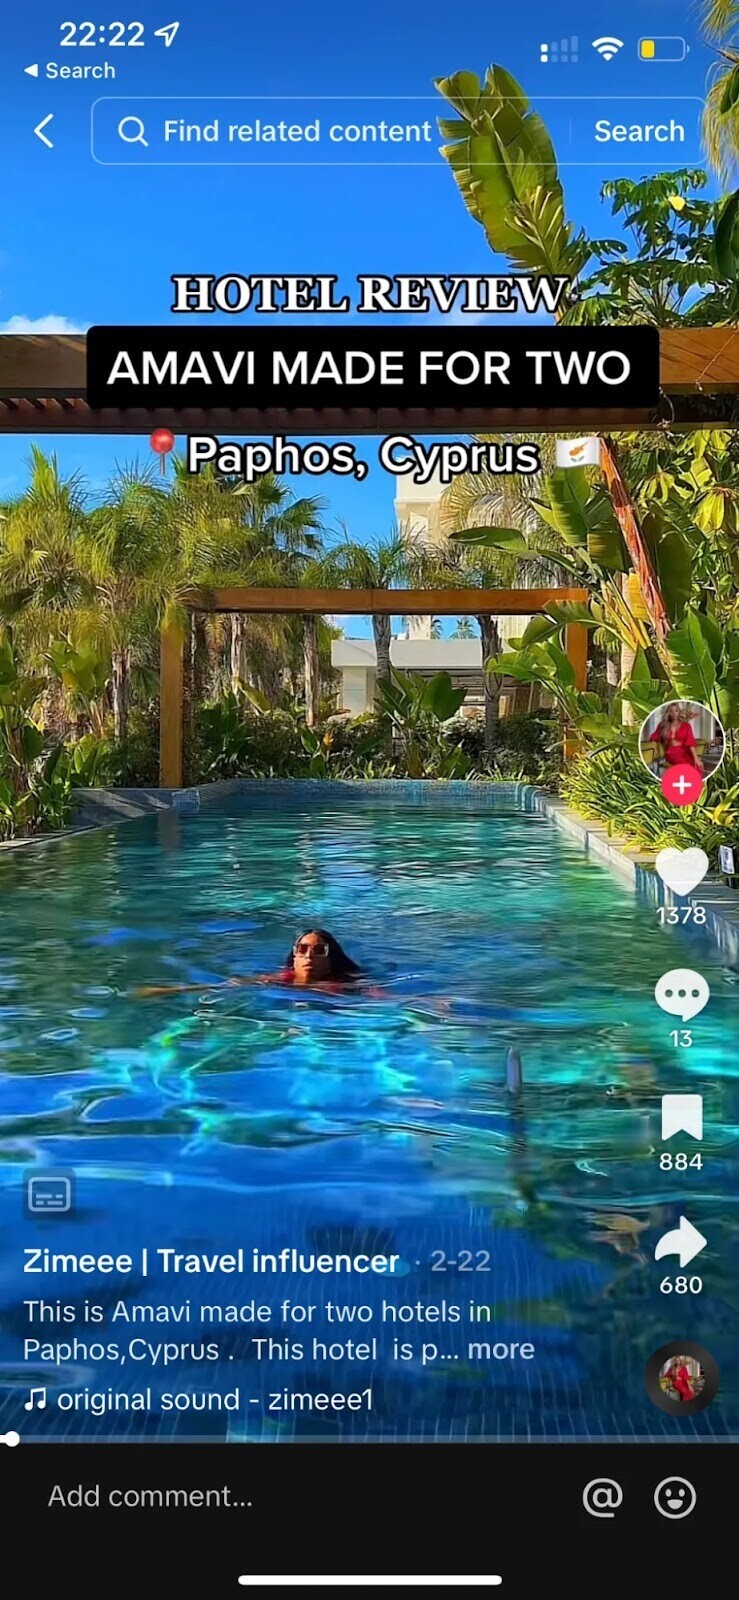 Zimeee TikTok post about the Amavi MadeForTwo hotel in Cyprus